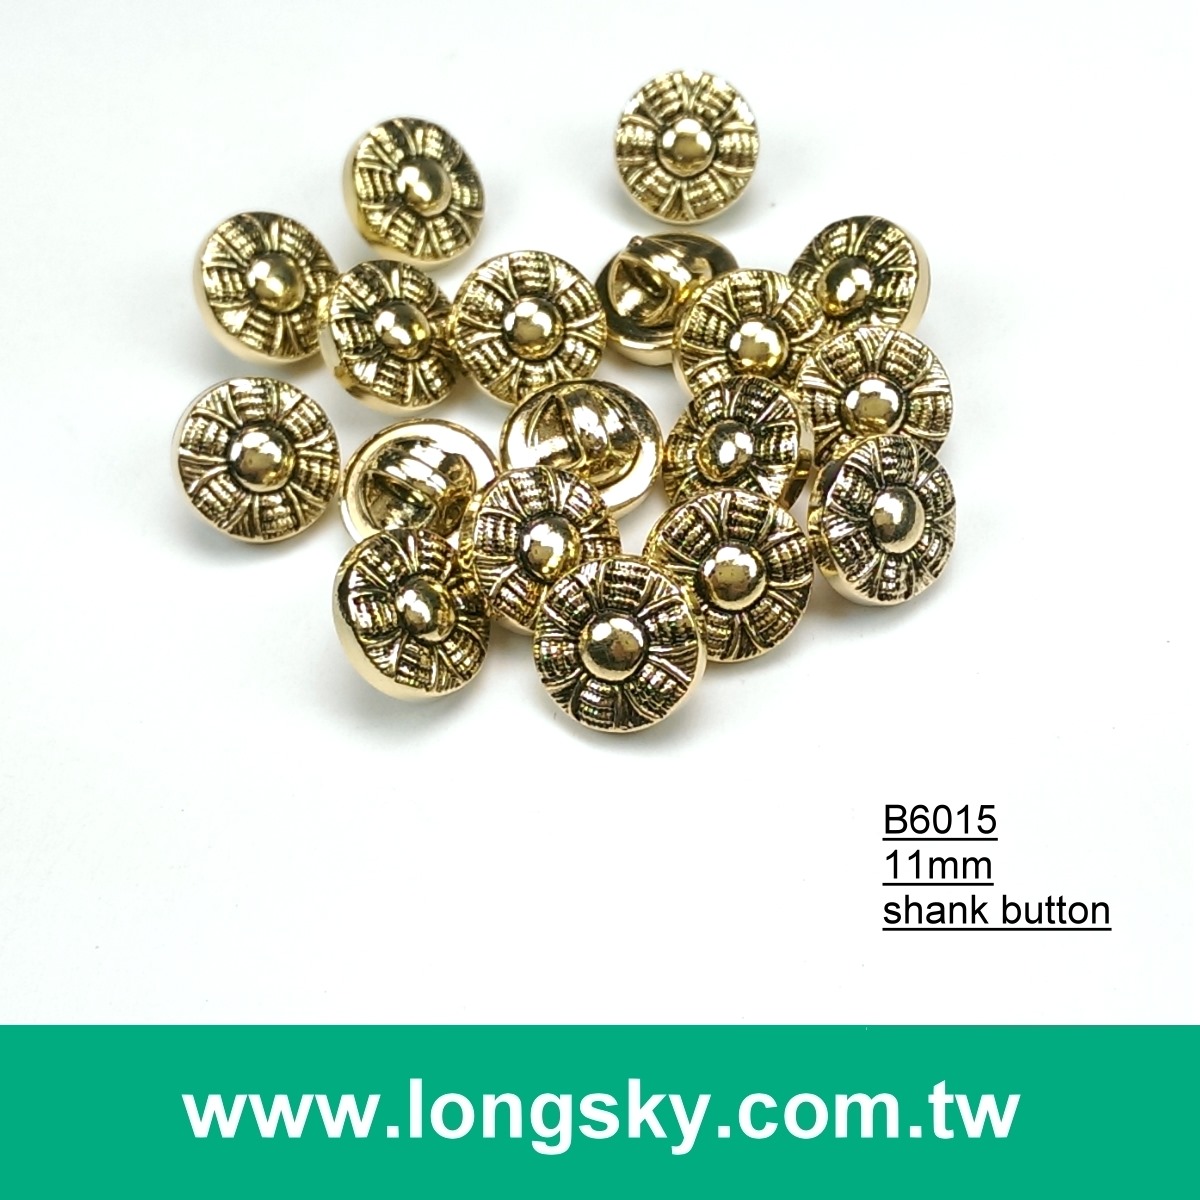 (#B6015/11mm) Taiwan fancy antique gold small shirt buttons with shank